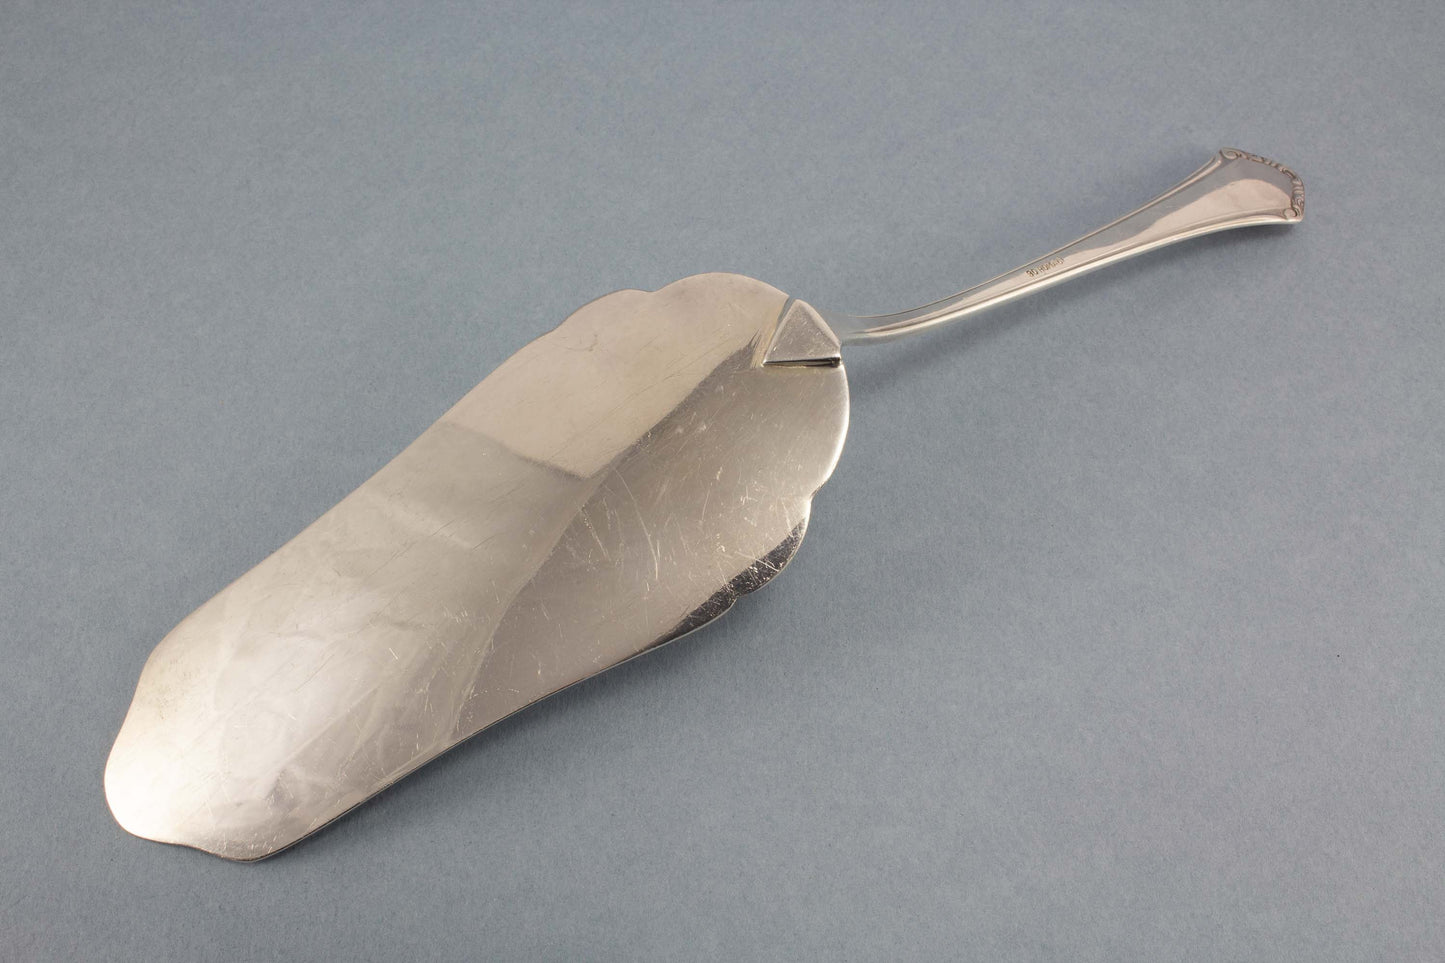 Cake server, silver-plated, pastry server, vintage cake server, cakes, silver-plated cutlery